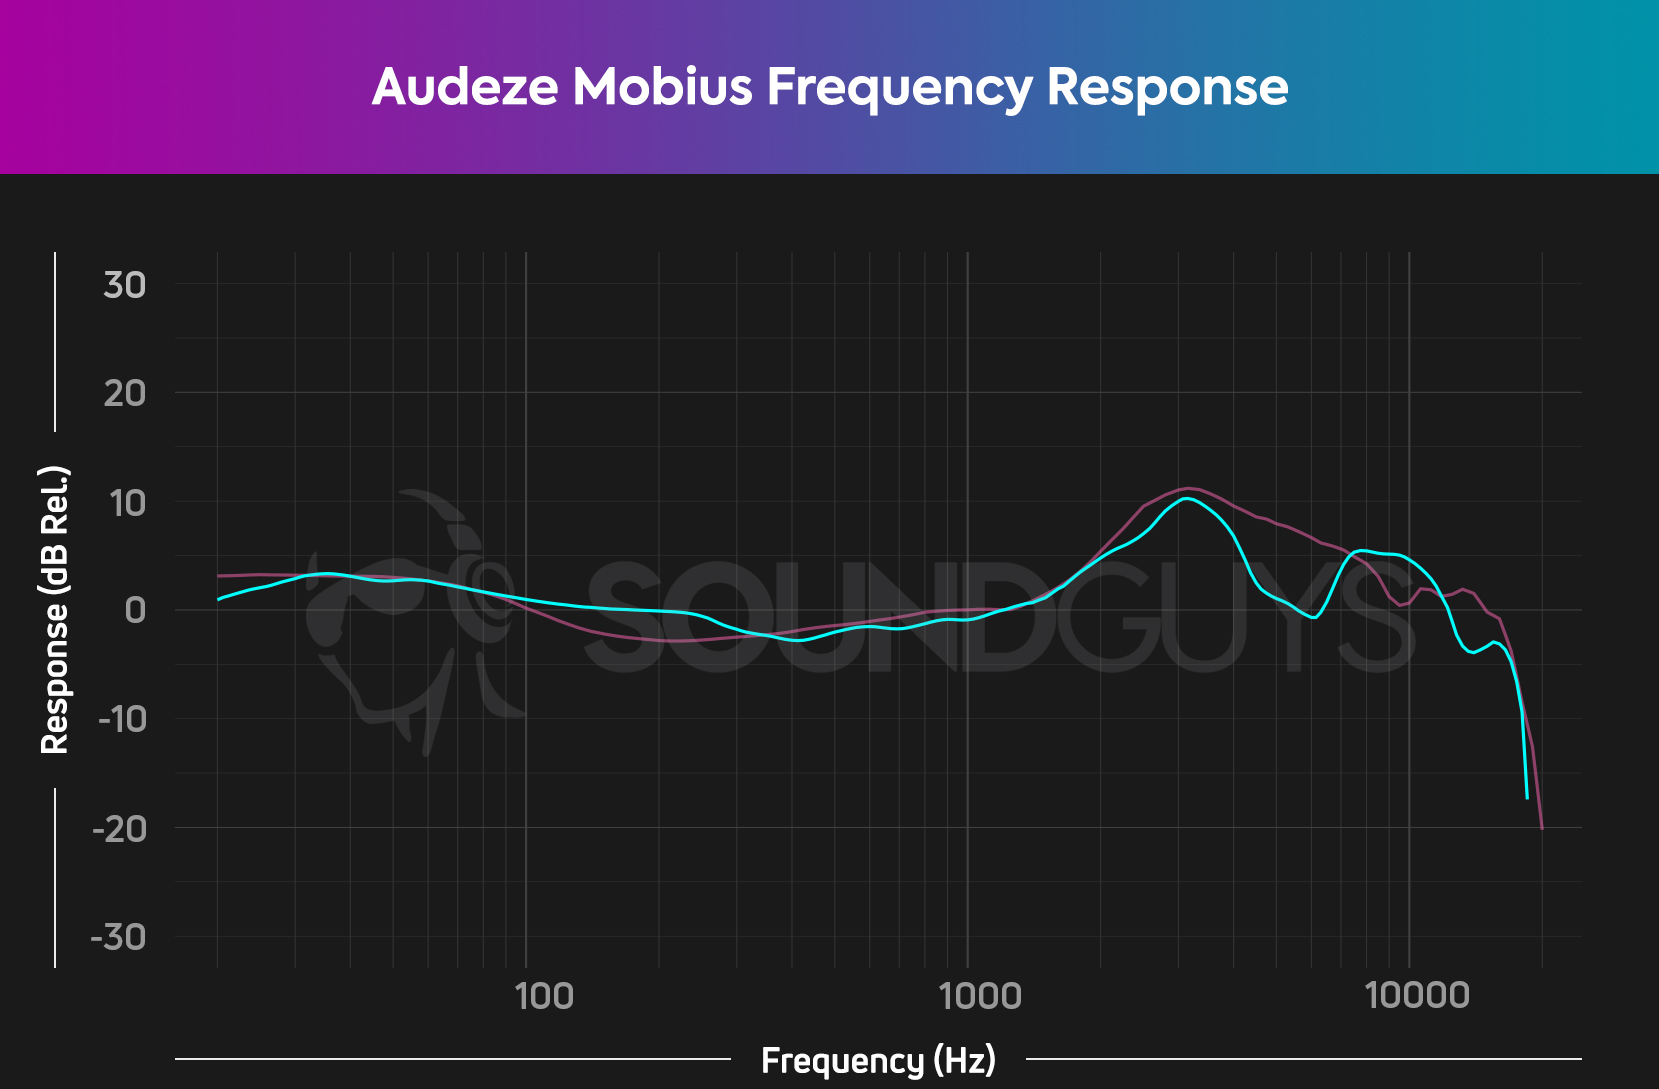 A chart comparing the frequency response of the Audeze Mobius gaming headset to the SoundGuys in-house curve, which shows very accurate audio across the audible spectrum